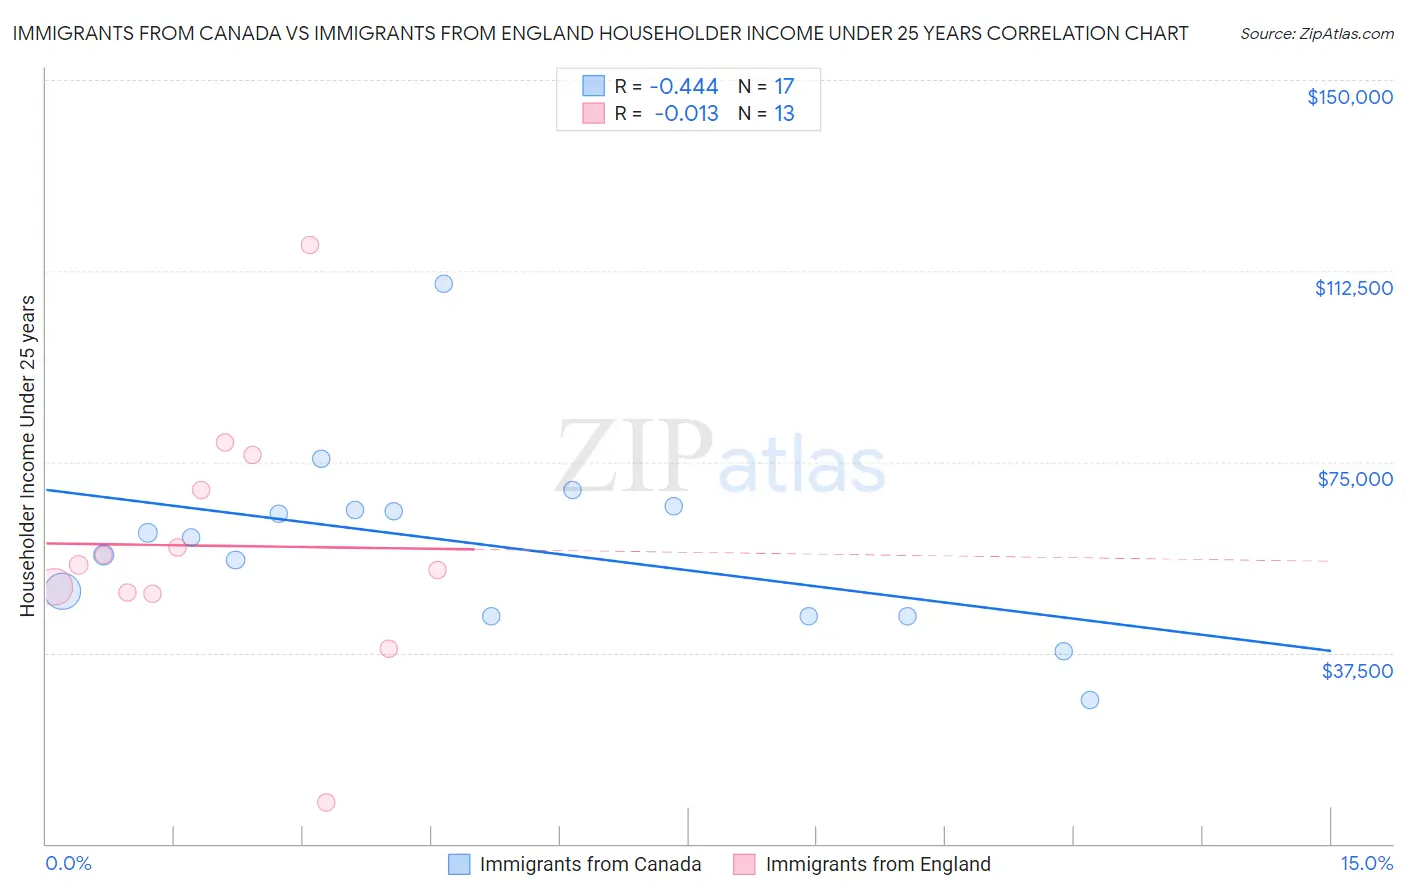 Immigrants from Canada vs Immigrants from England Householder Income Under 25 years